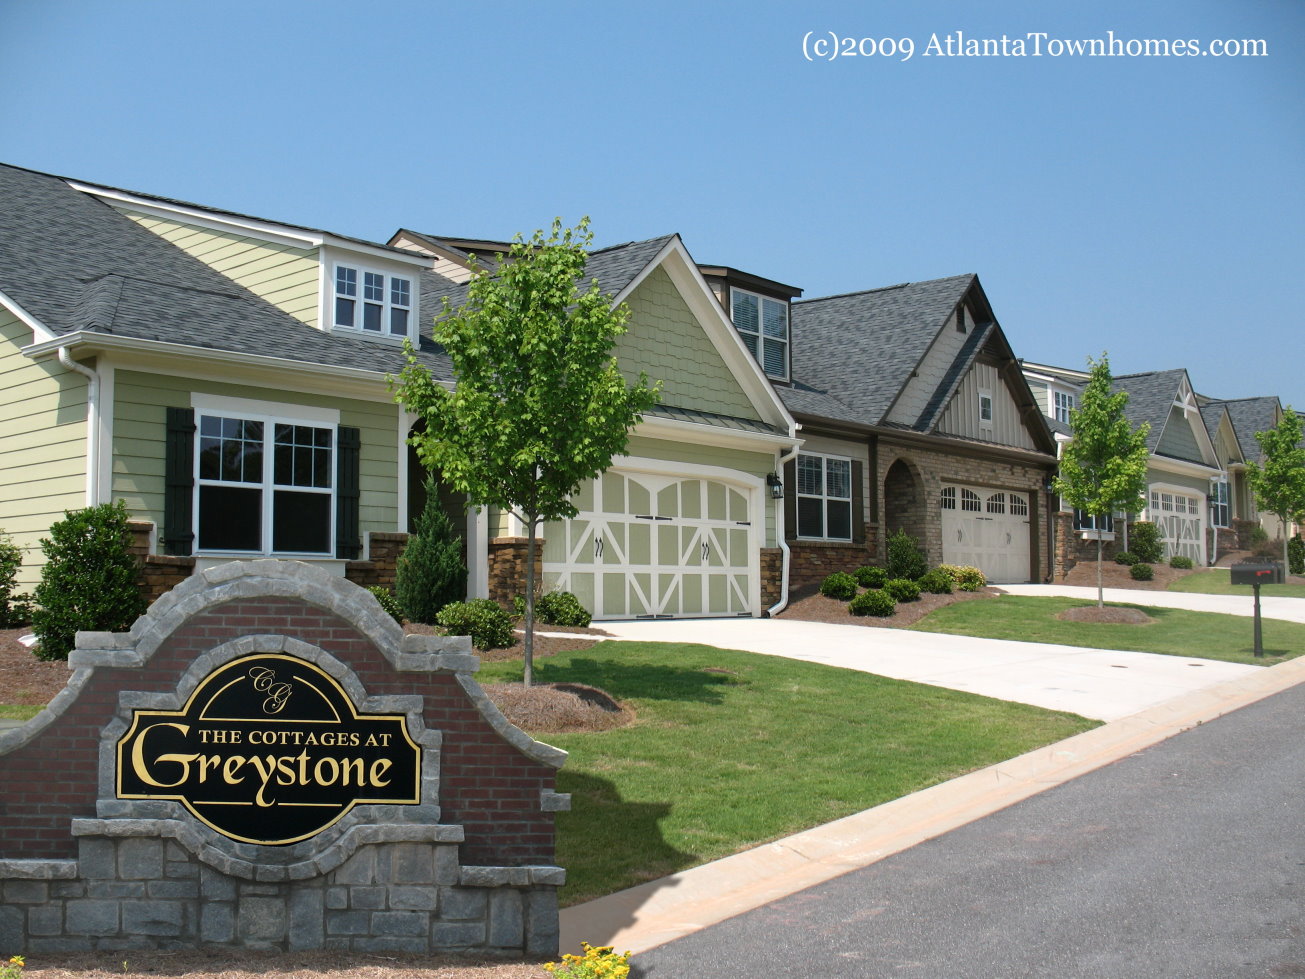 Cottages At Greystone